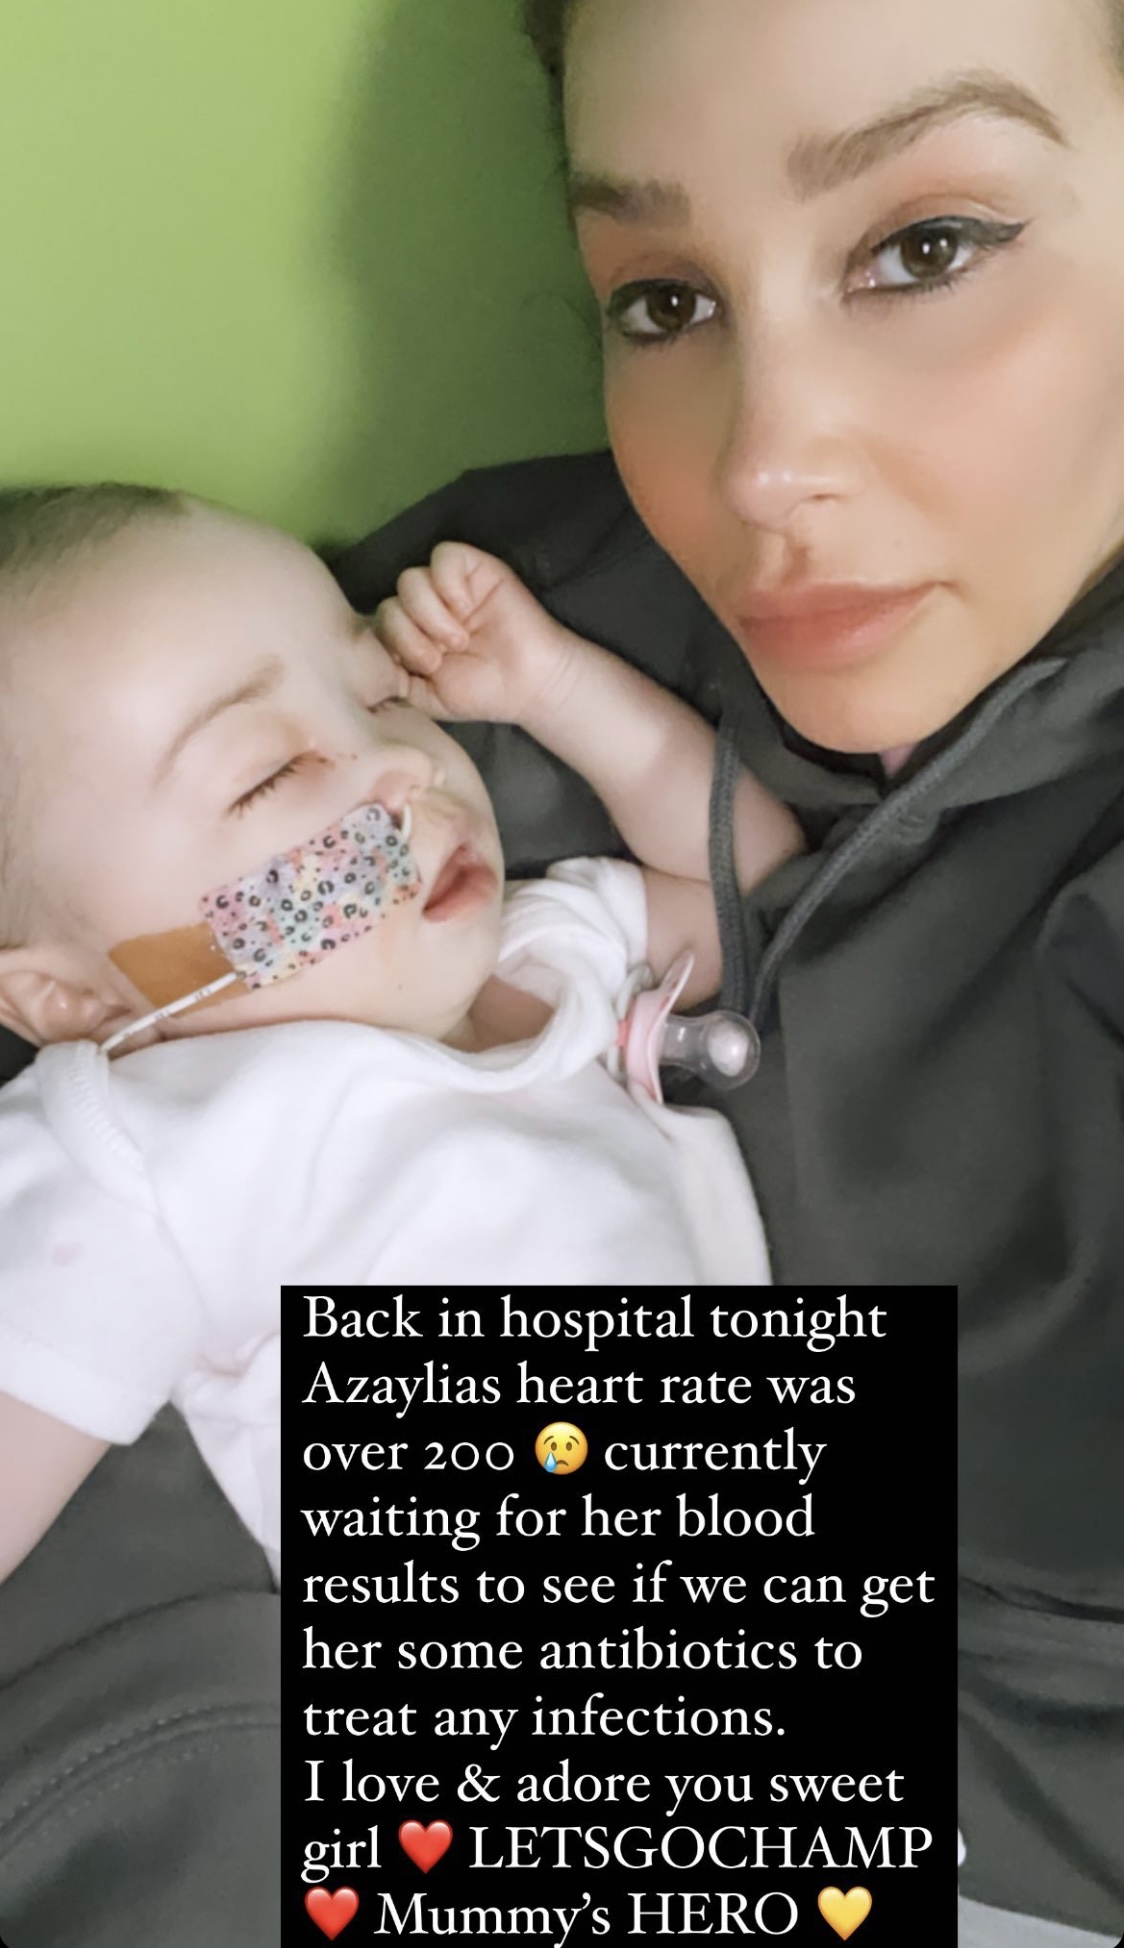 Ashley Cain’s Daughter Rushed To Hospital Shortly After Returning Home With ‘Days To Live’